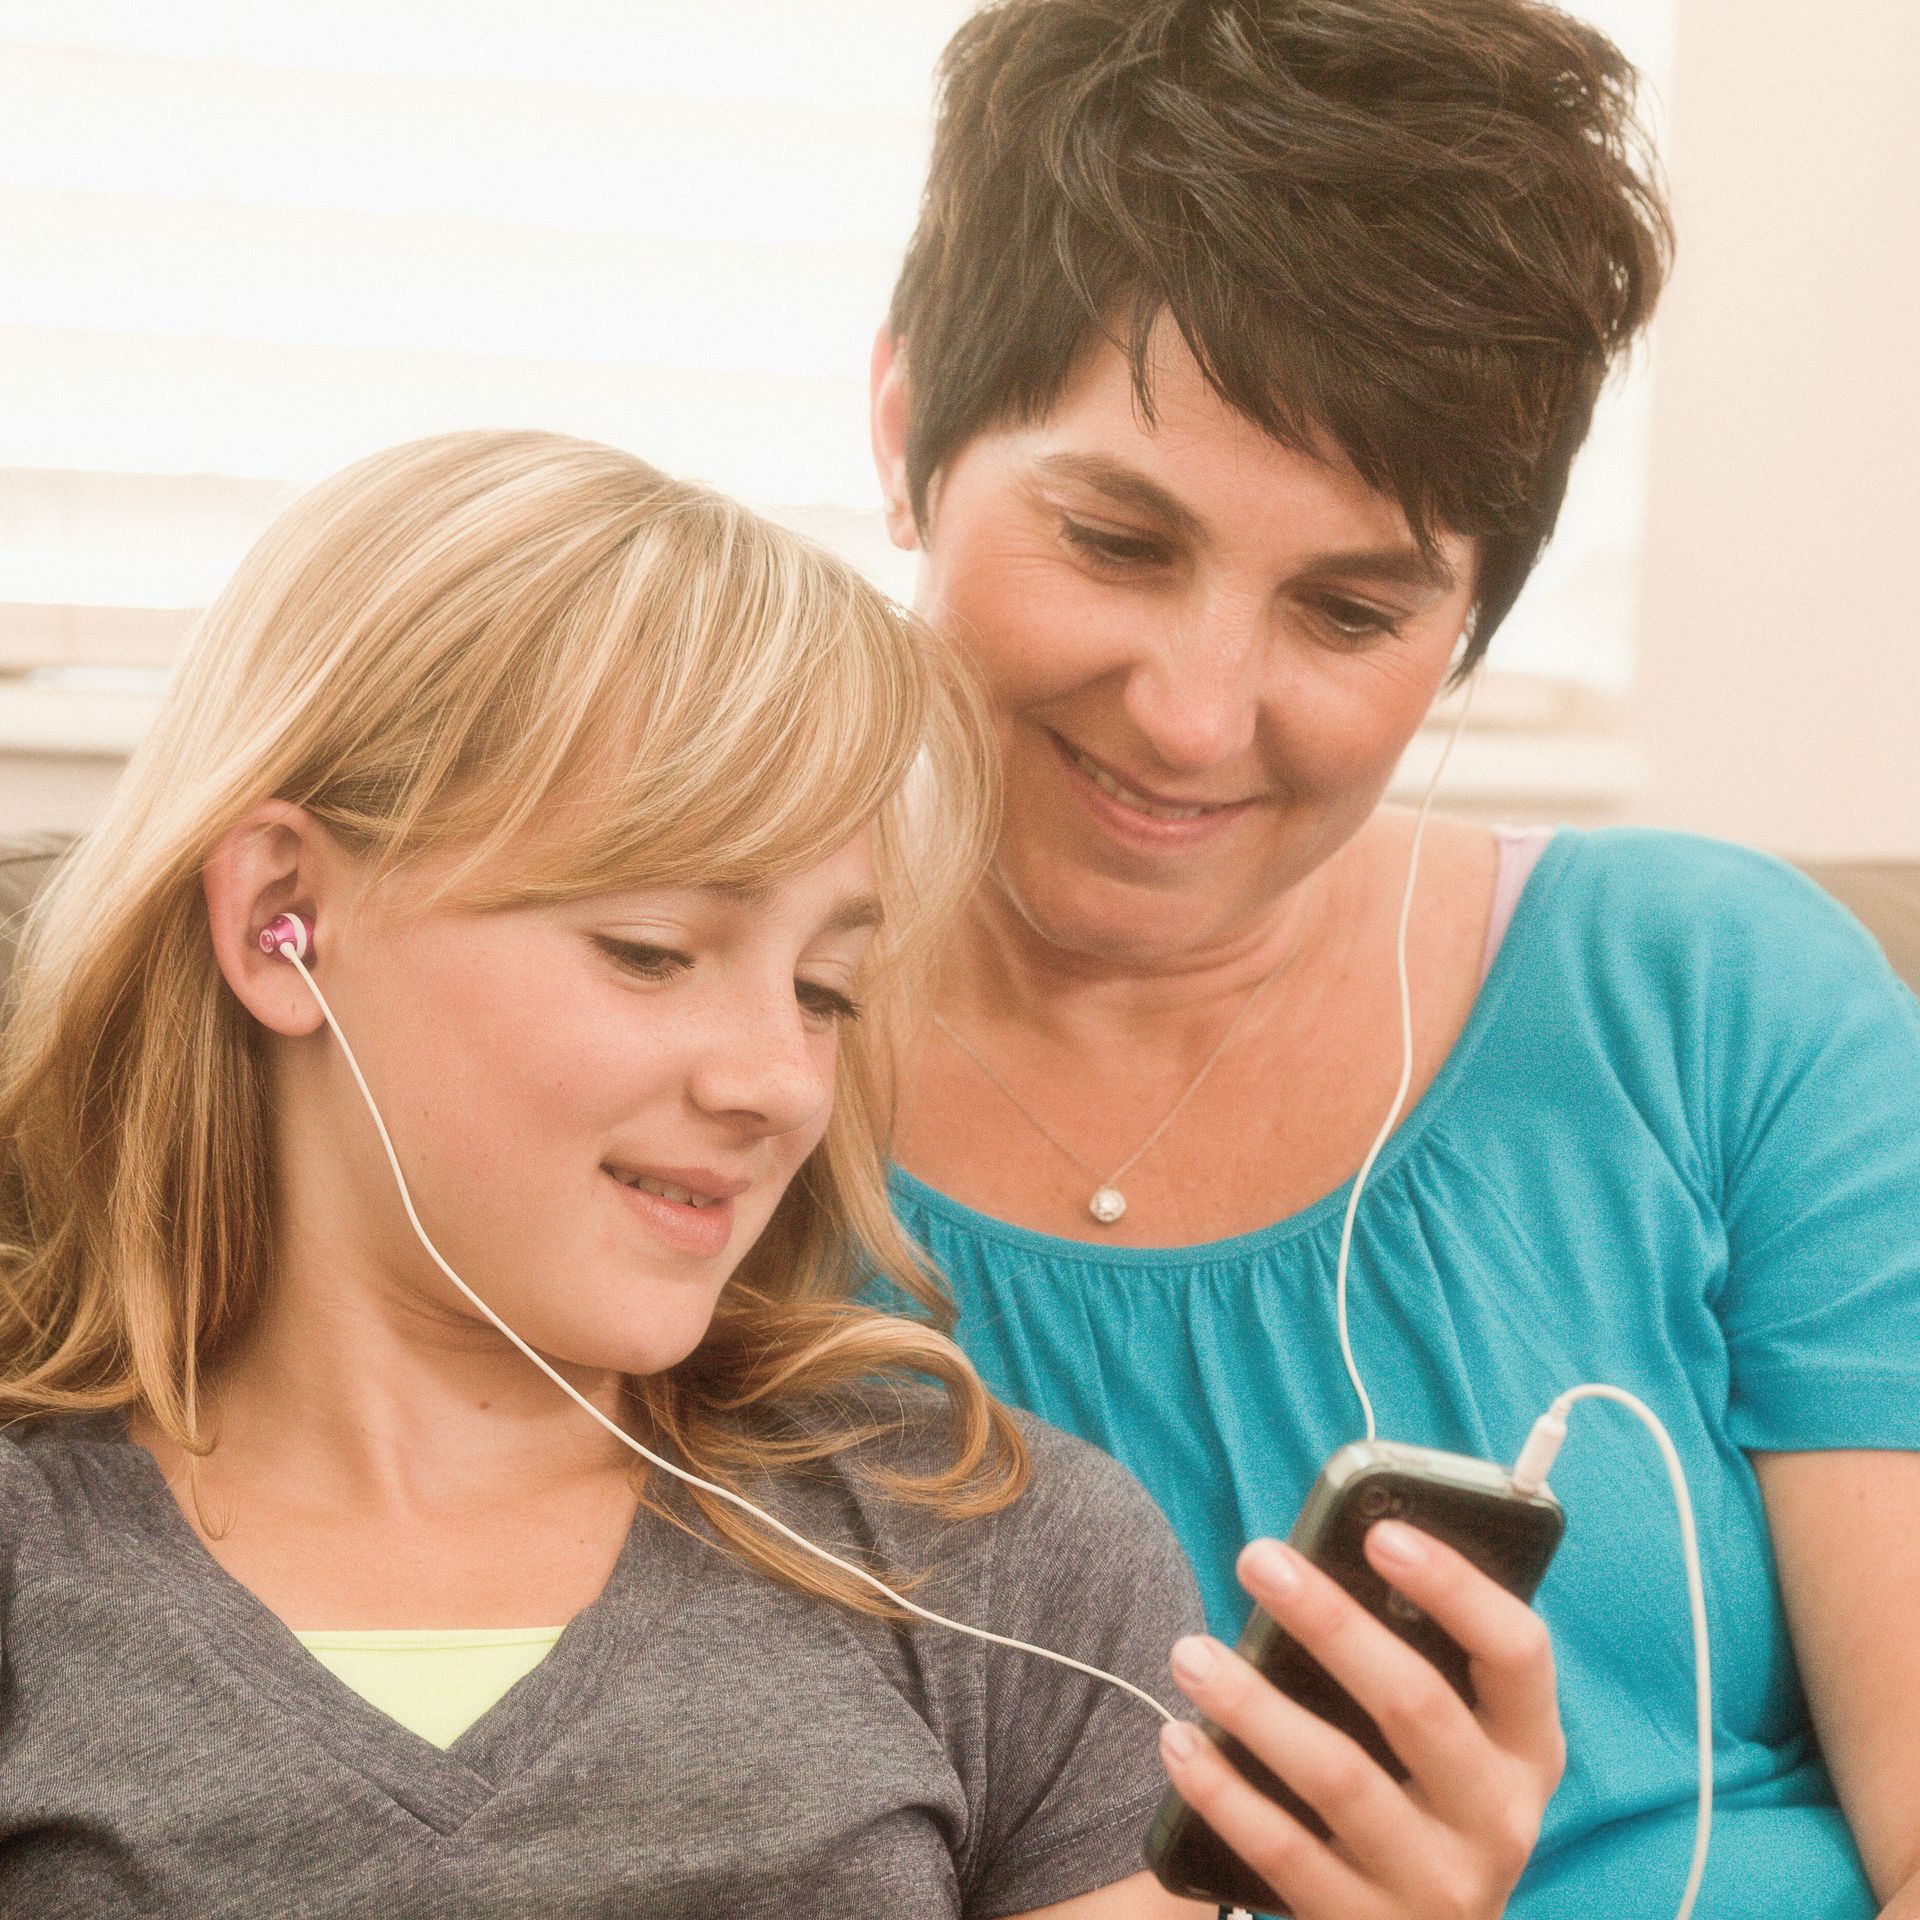 A mother and daughter listen to music on headphones together.